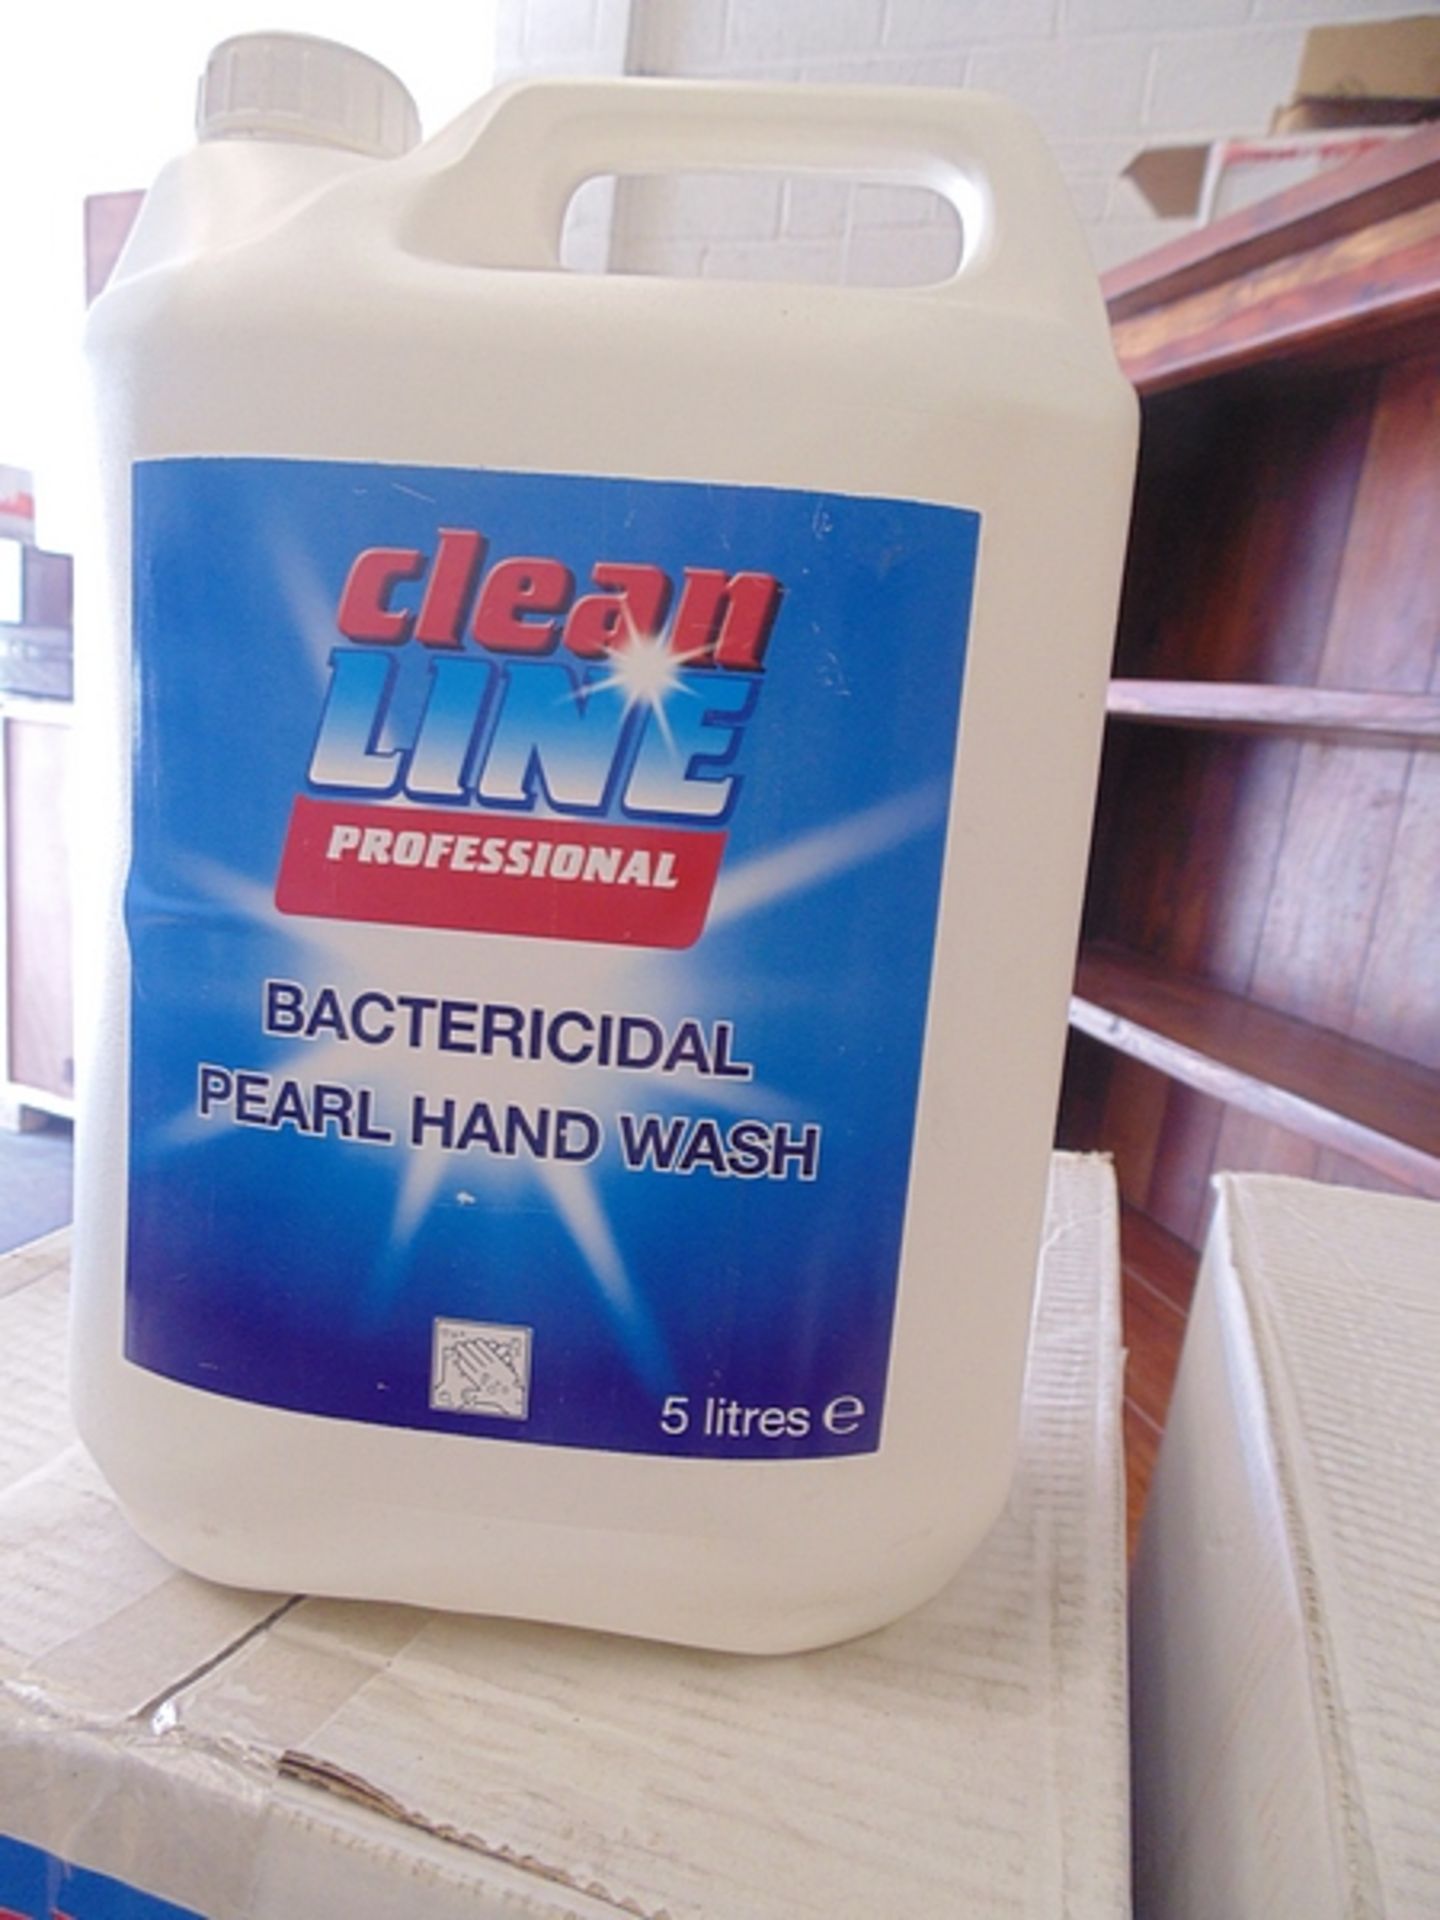 Job lot of 16 x 5 litre tubs of brand new Cleanline Pearl hand soap with bactericide, and 4 x 5